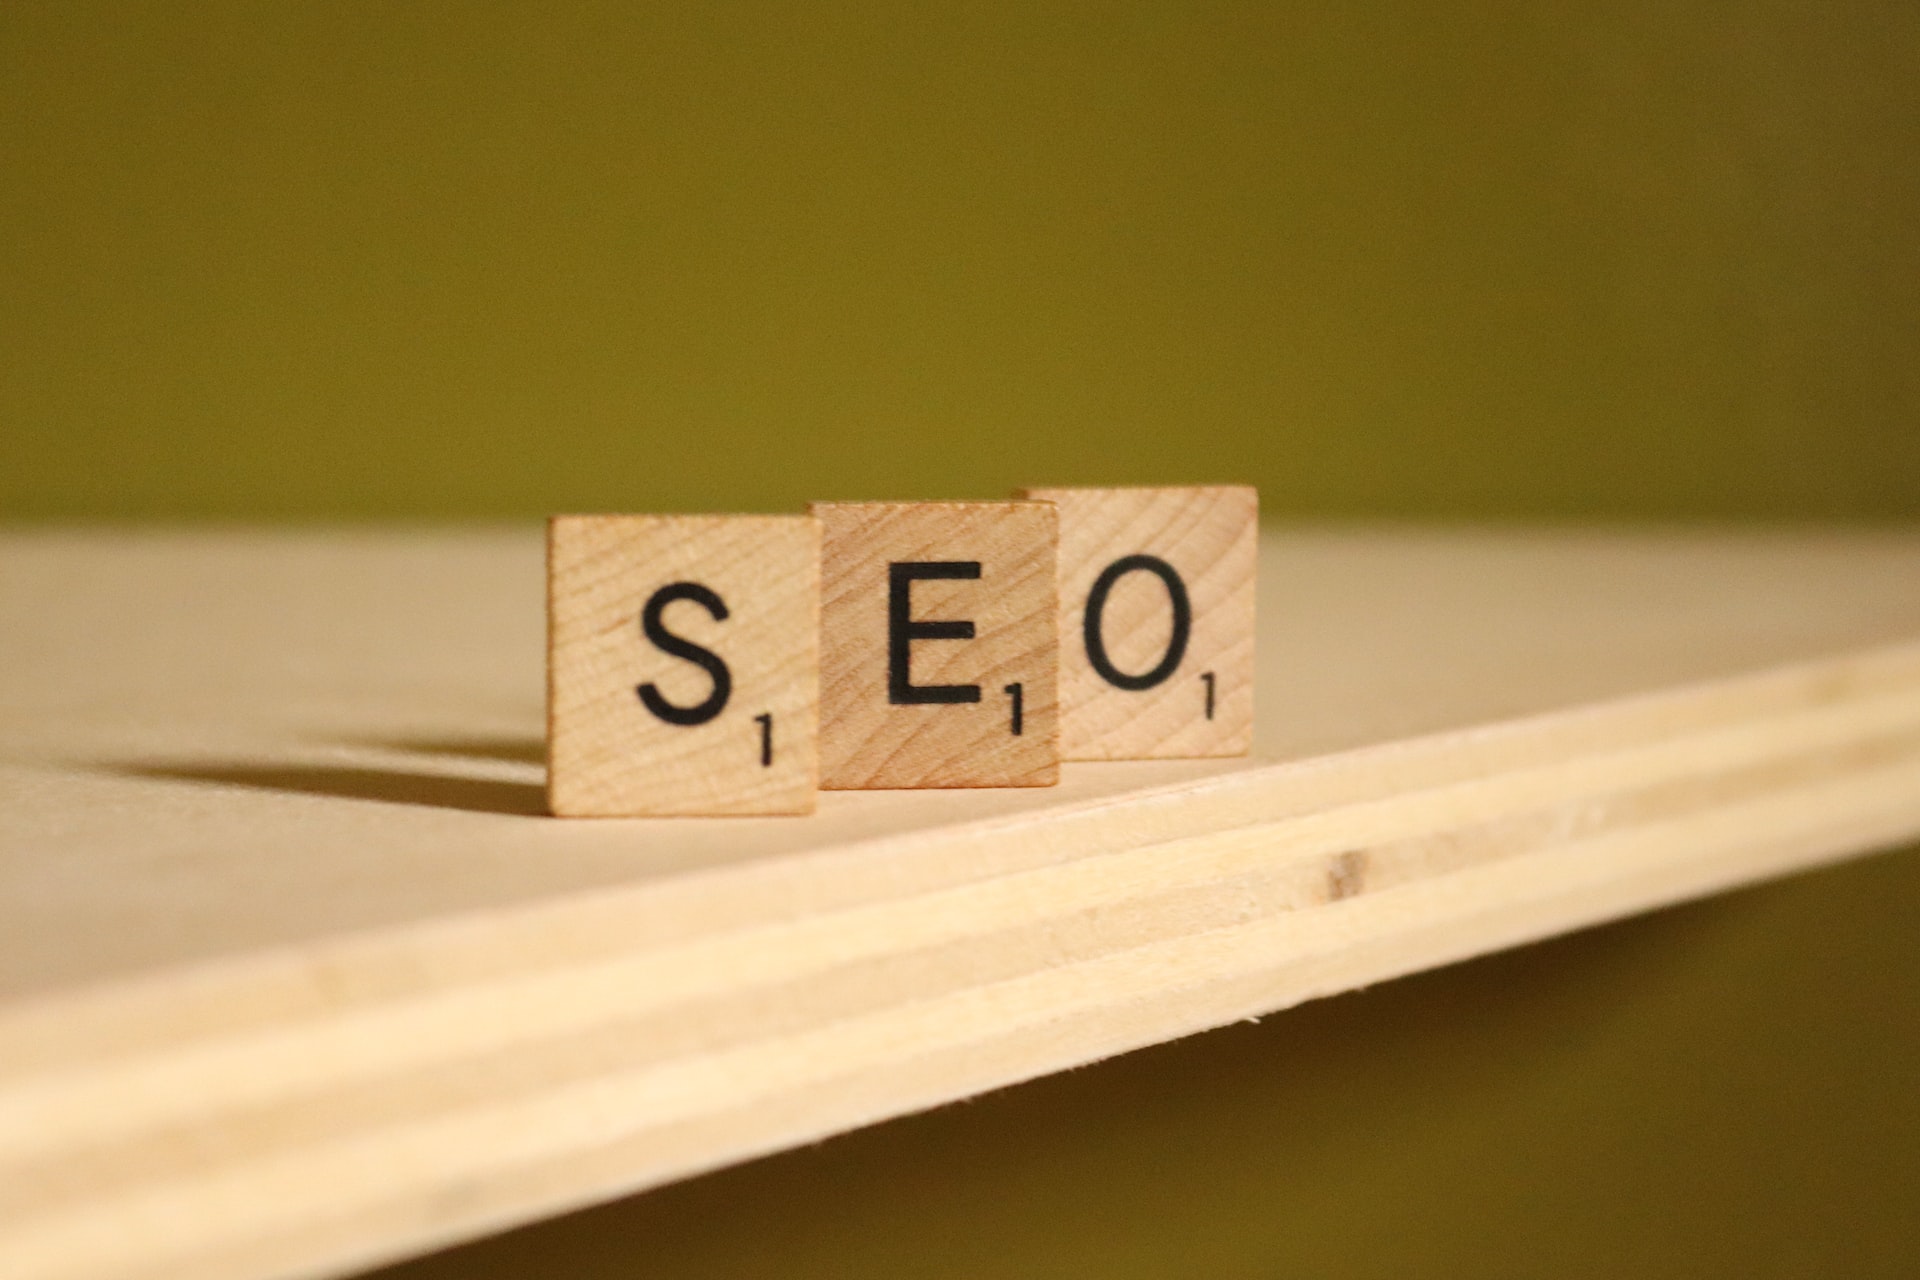 How to find best SEO keywords Image